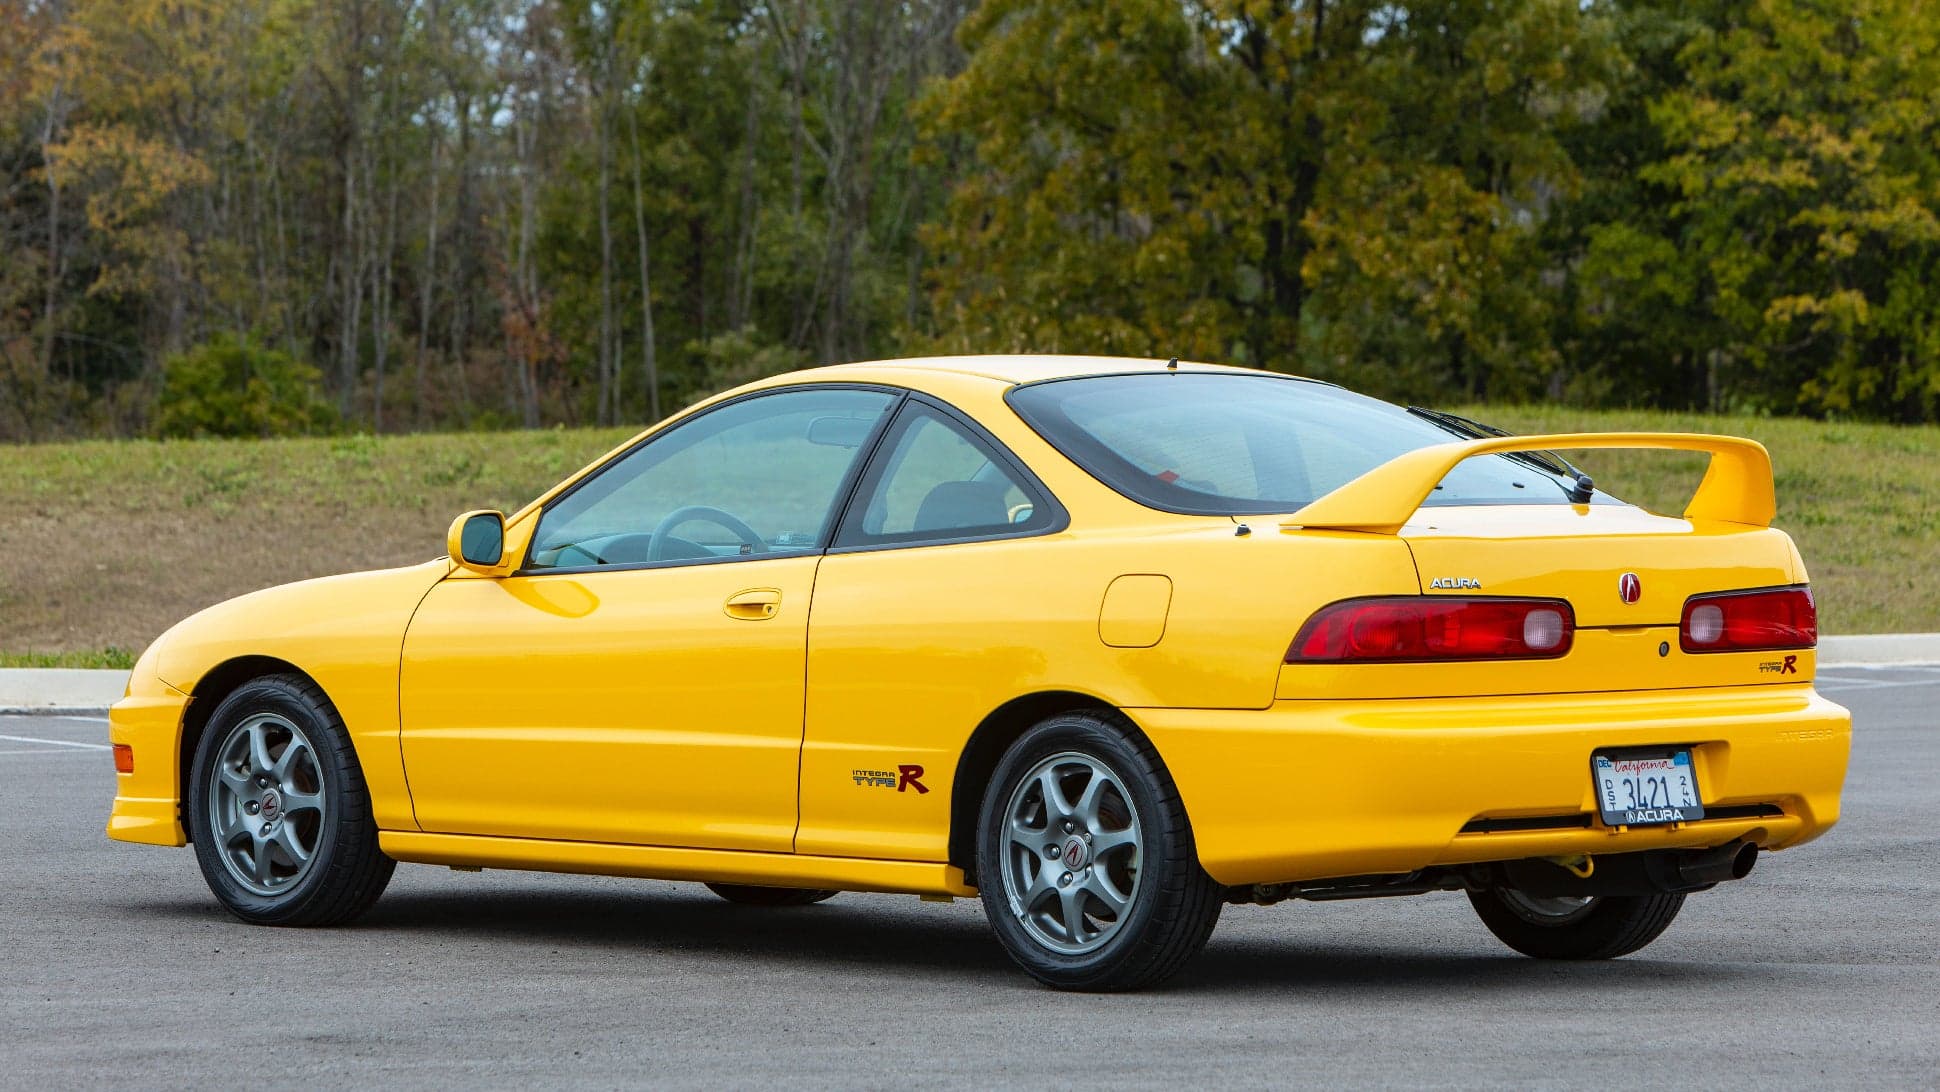 It’s Time to Bring Back the Acura Integra